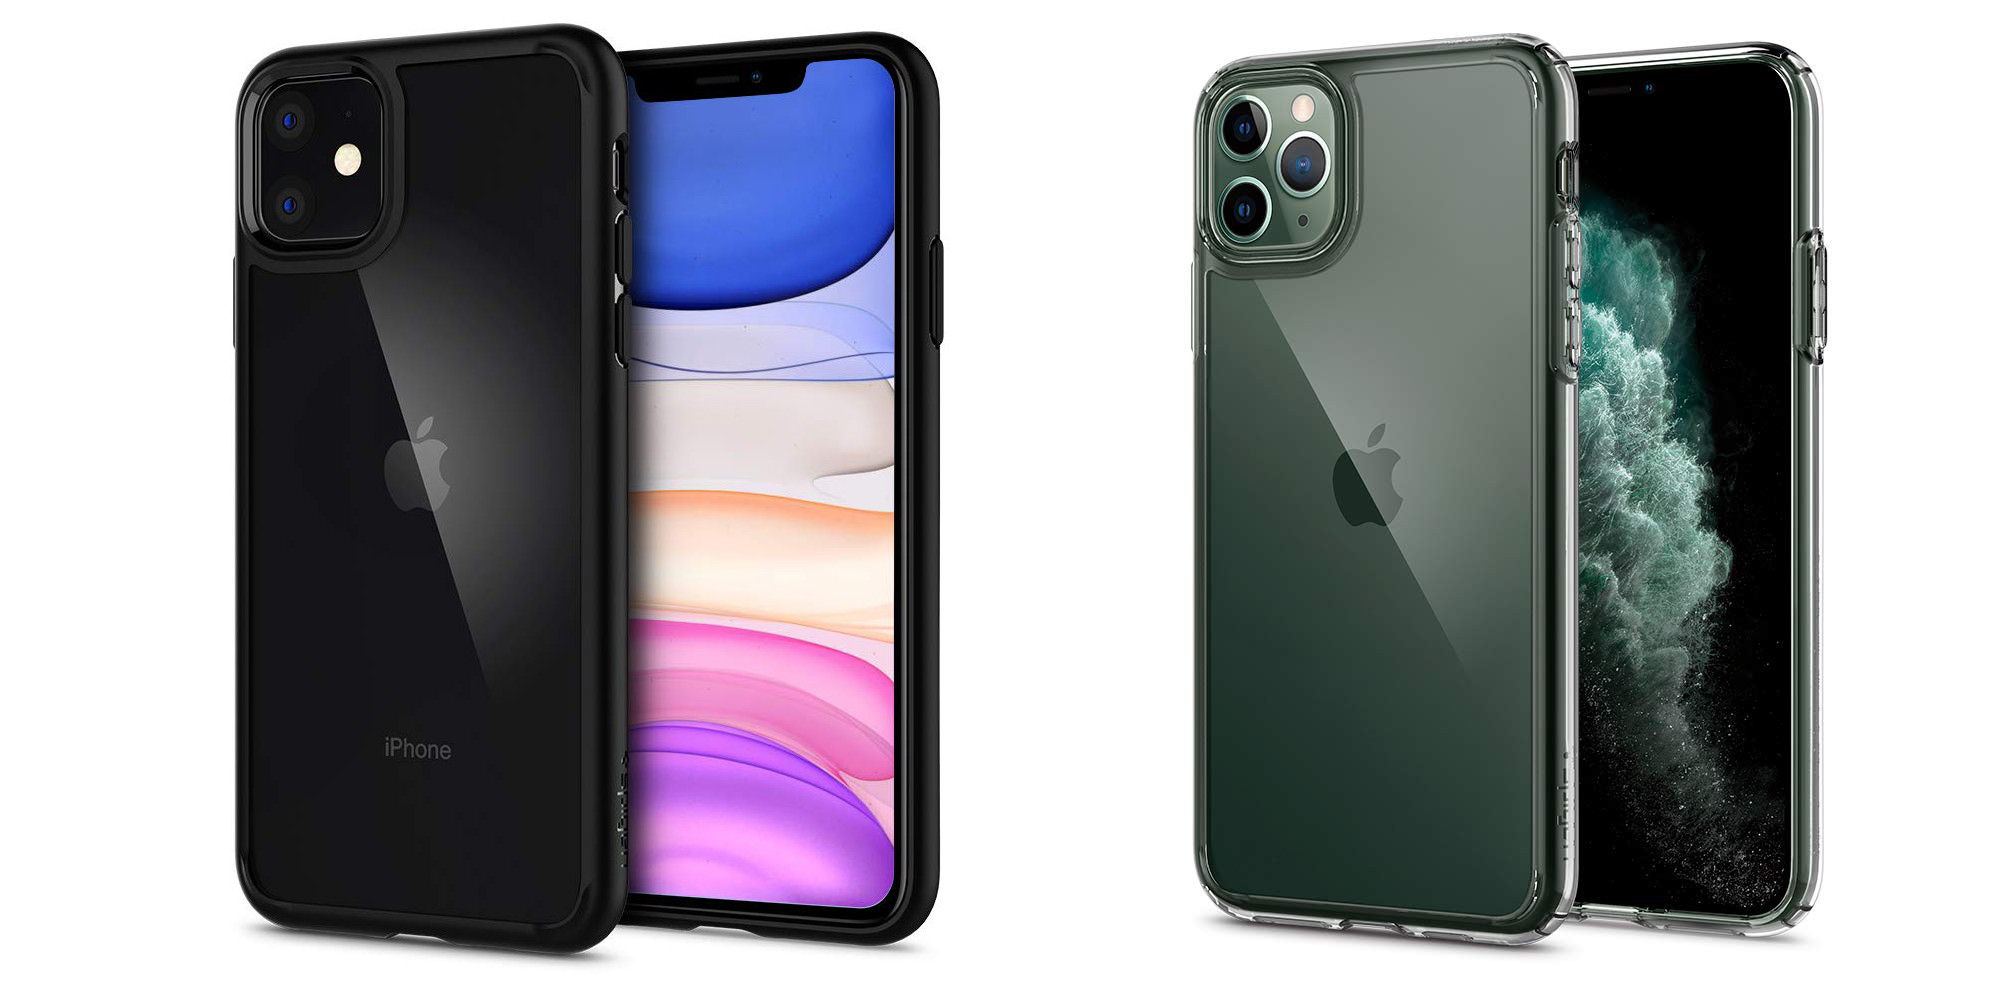 Spigen&#39;s iPhone 11/Pro/Max Ultra Hybrid Case is down to $9.50 (Reg. up to $25) - 9to5Toys